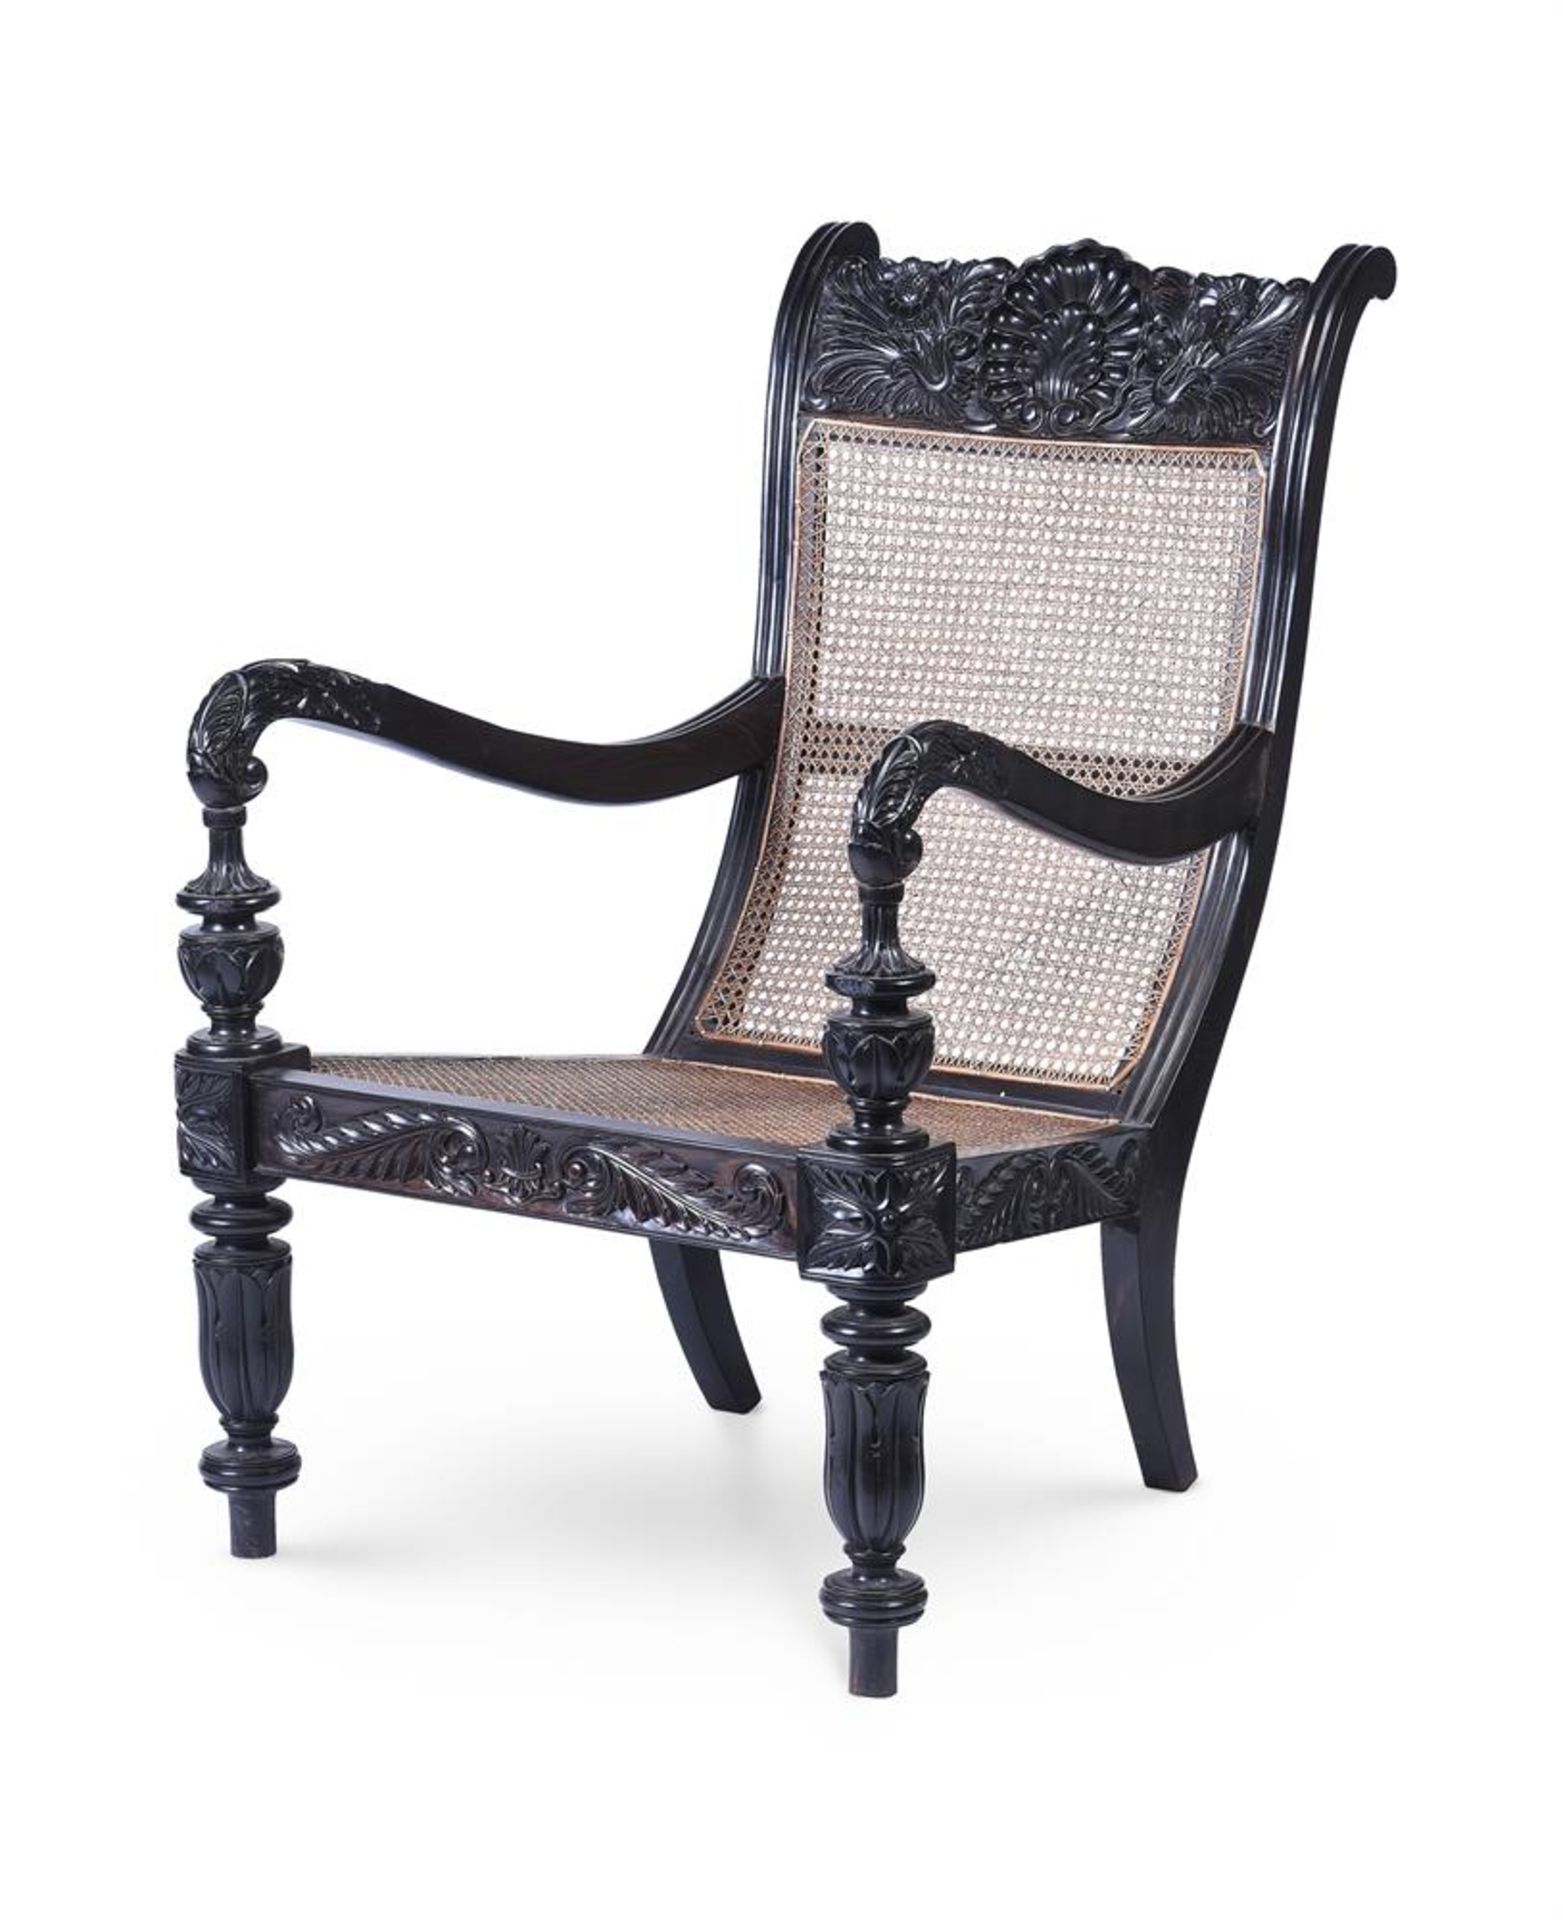 Y A CEYLONESE CARVED EBONY ARMCHAIR, PROBABLY GALLE DISTRICT, FIRST HALF 19TH CENTURY